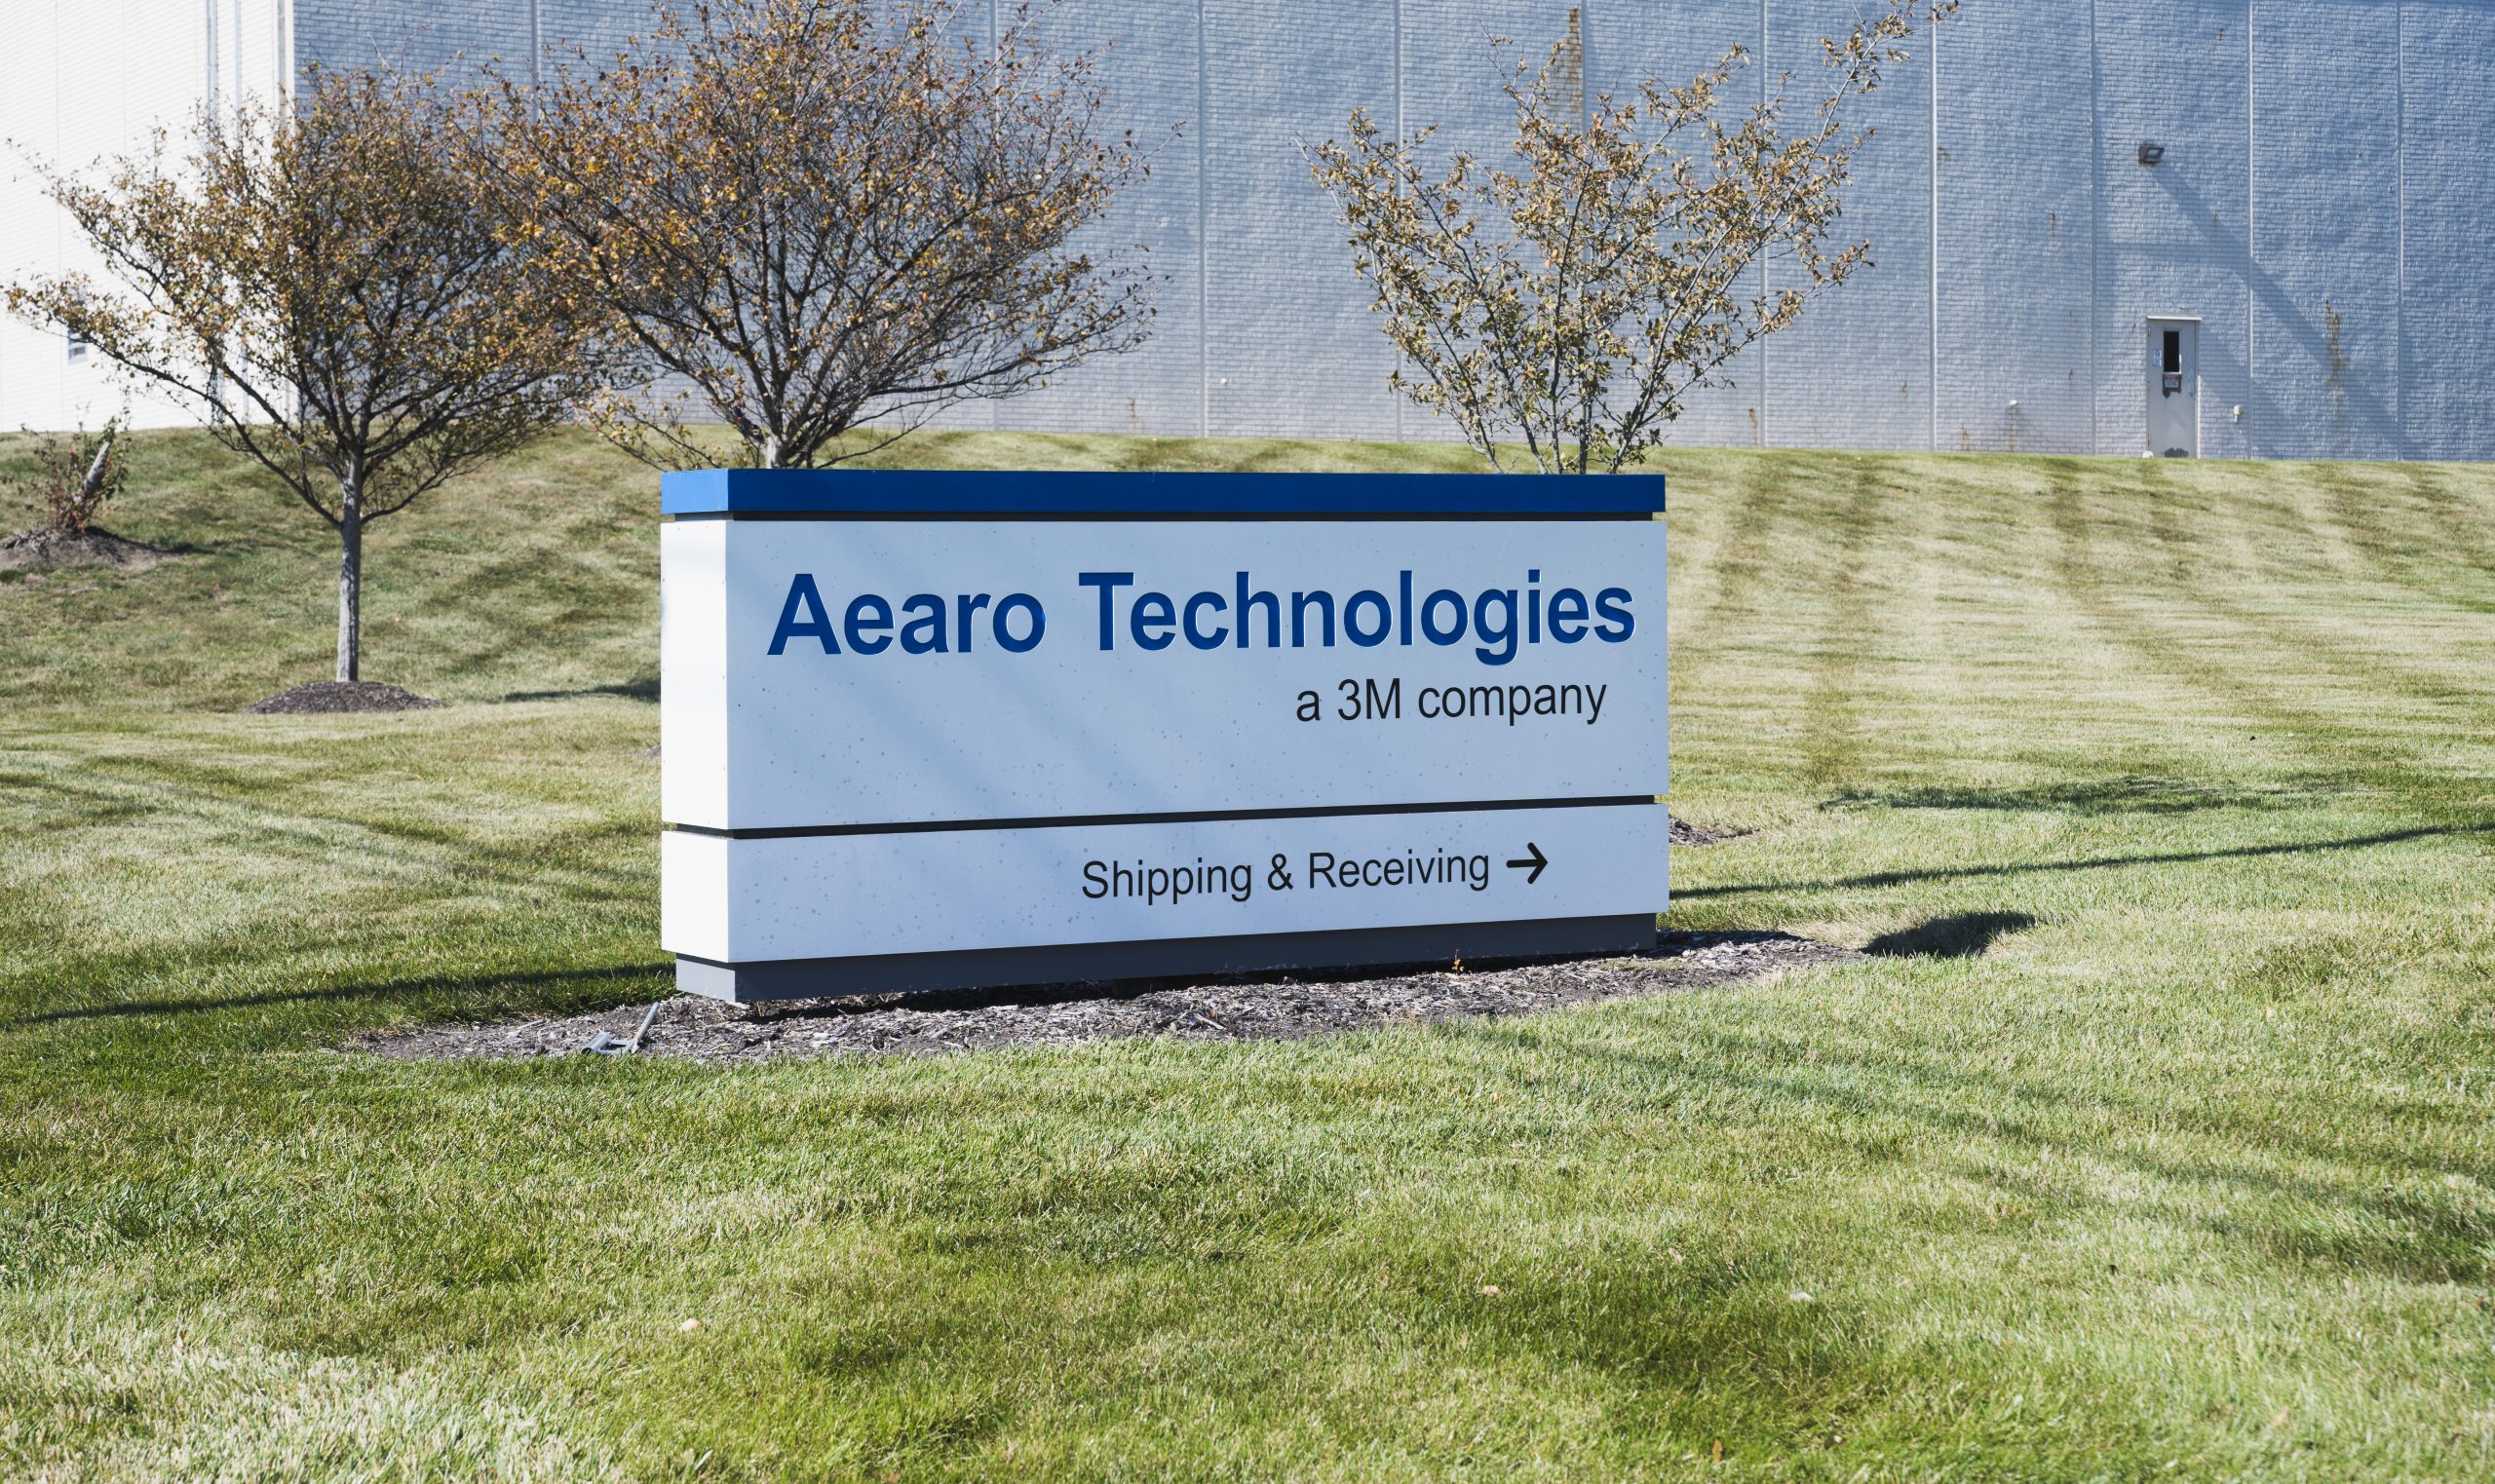 The Aearo Technologies facilities' Shipping and Receiving entrance signage